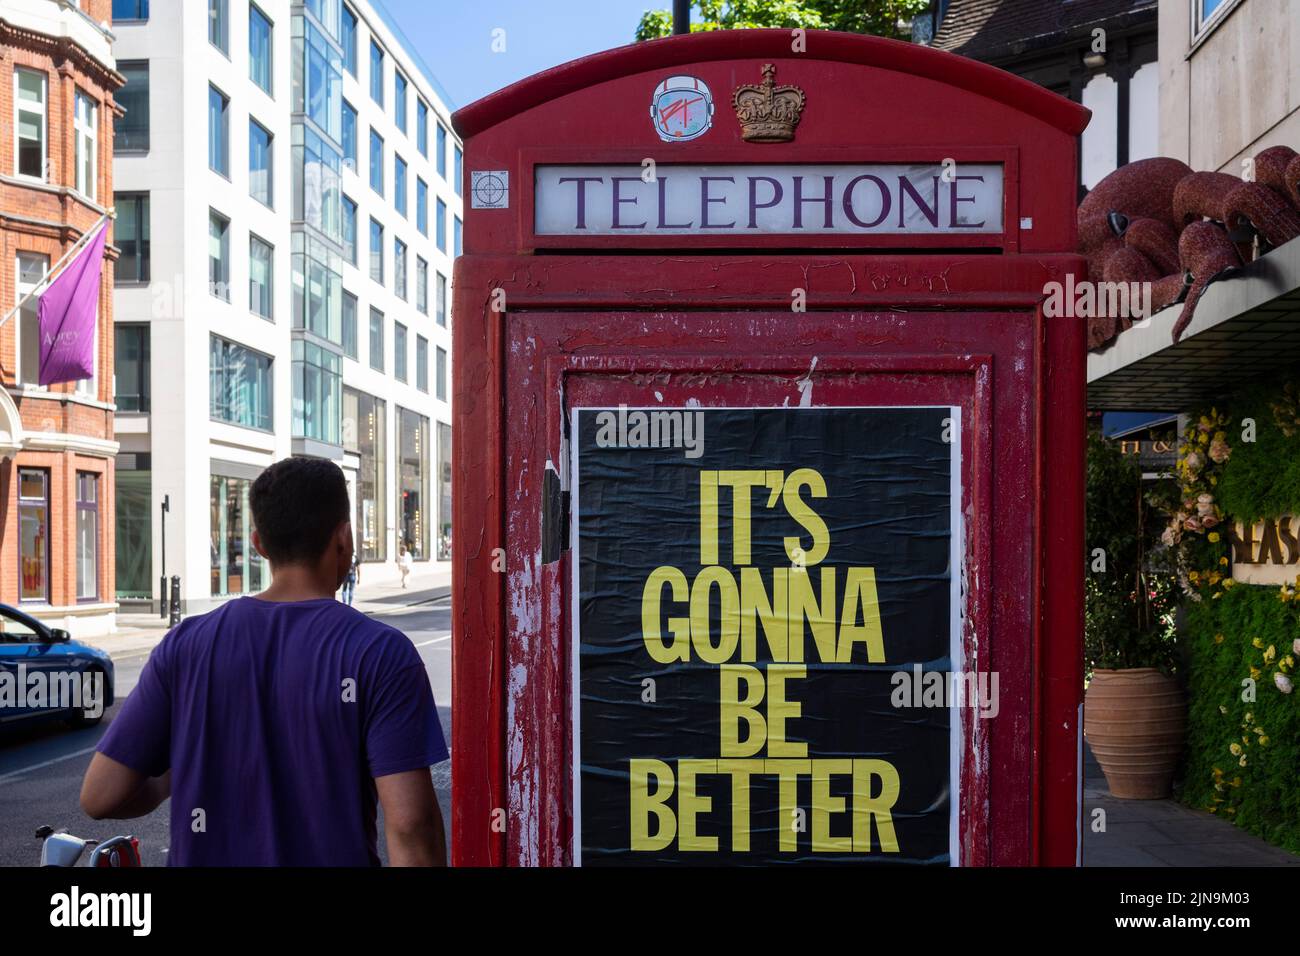 London, UK.  10 August 2022.  A man walks past a telephone box in Mayfair which carries a promotional message “It’s Gonna Be Better”.  Given the UK’s current economic woes, rising inflation rate, rise in the base rate, cost of living crisis and drought conditions, some might see this as a hope for the future.  Credit: Stephen Chung / Alamy Live News Stock Photo